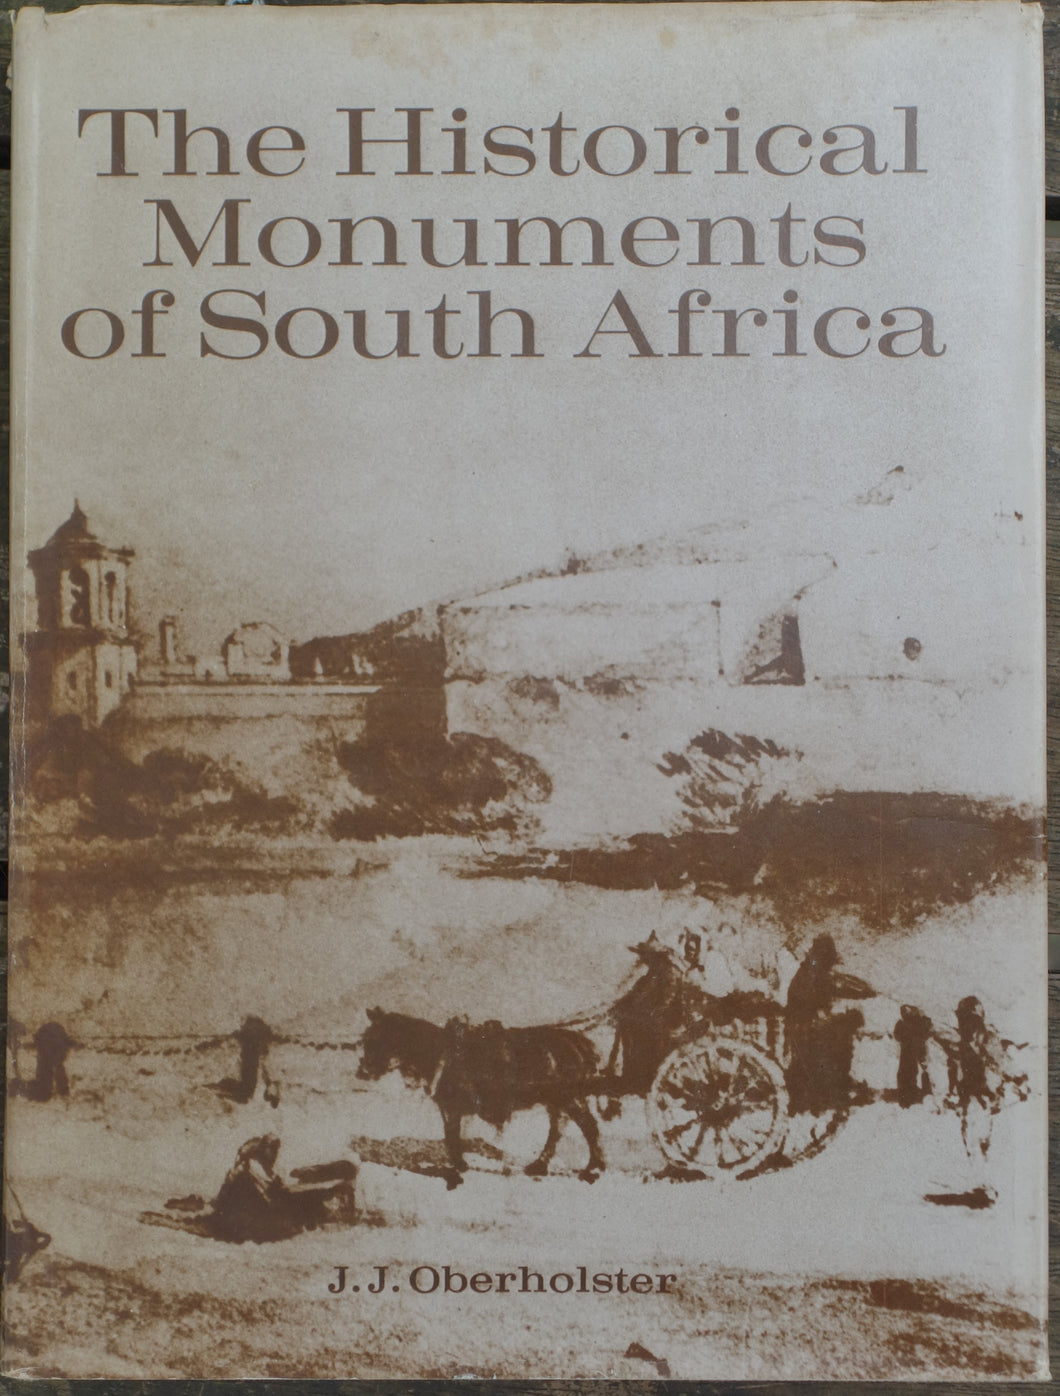 'THE HISTORICAL MONUMENTS OF SOUTH AFRICA' by J.J. Oberholster